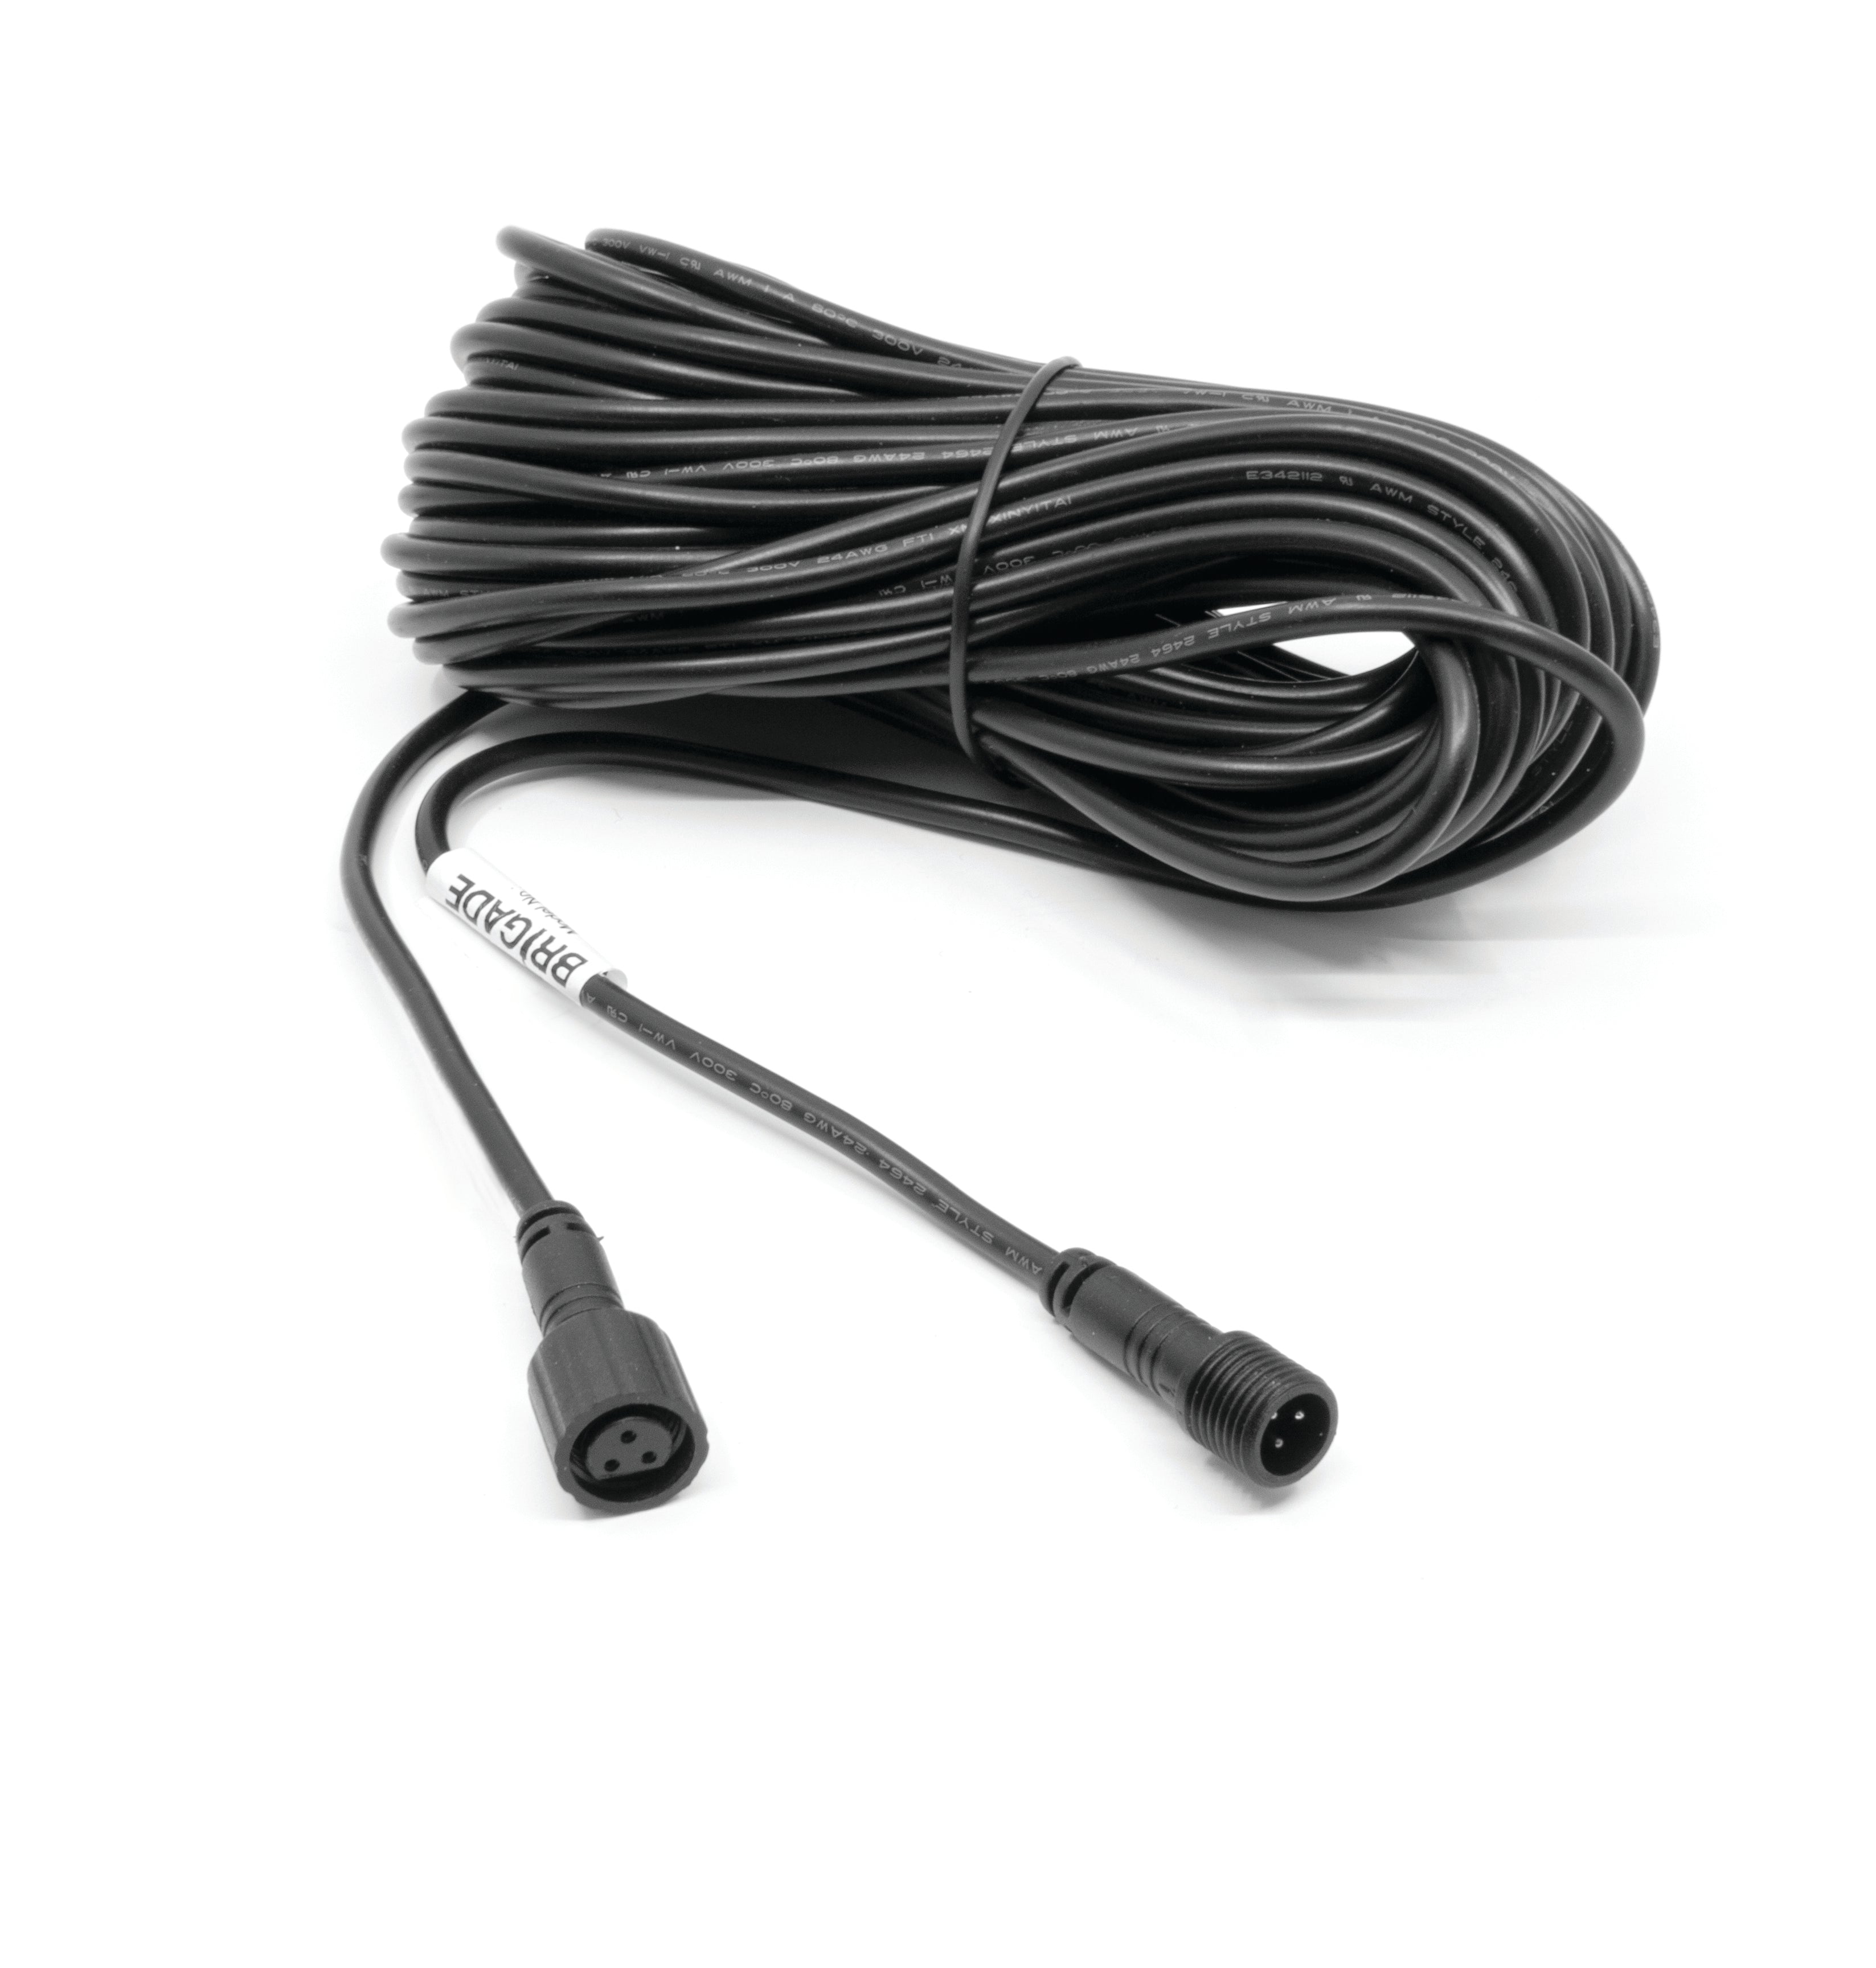 Sensor extension cable 2.5 Metre for Ultrasonic detection systems